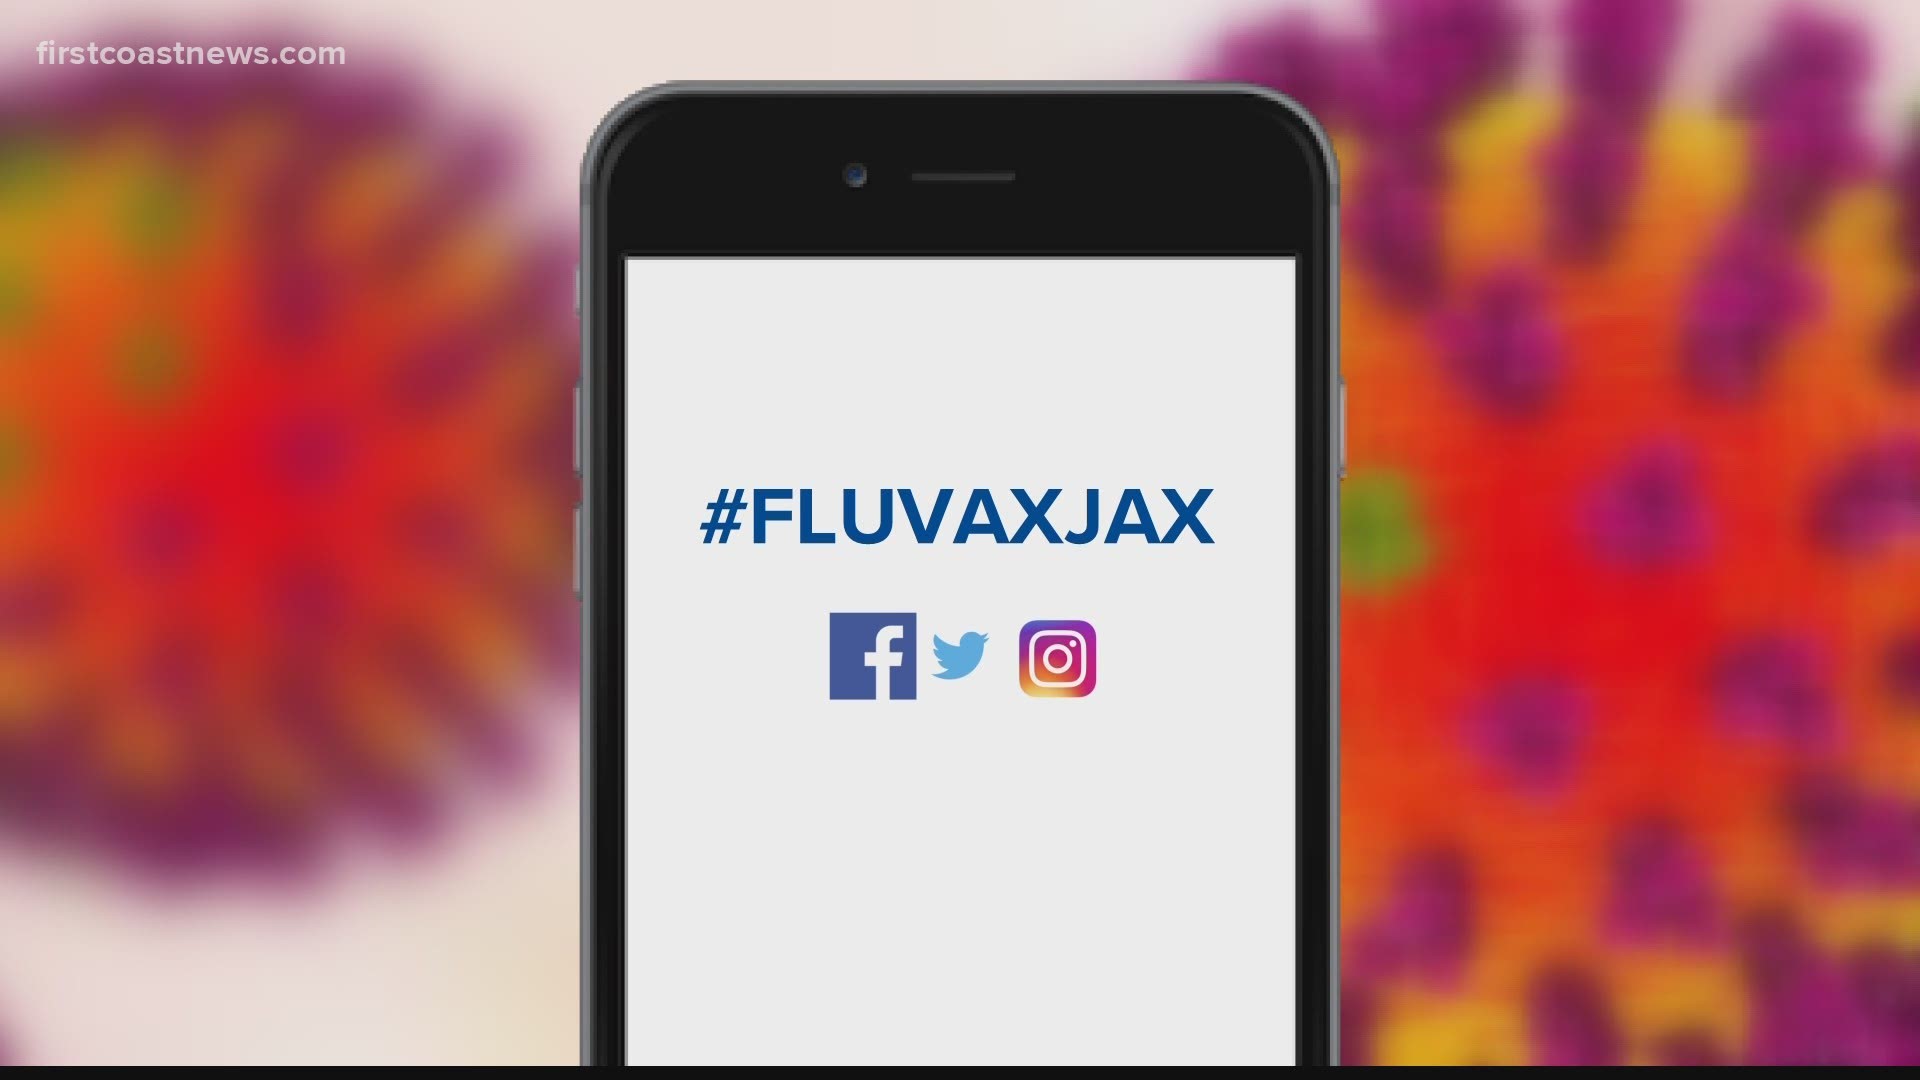 You can show the world you got your flu shot using the hashtag #FluVaxJax to support the initiative and spread the word of how important it is to get a flu shot.